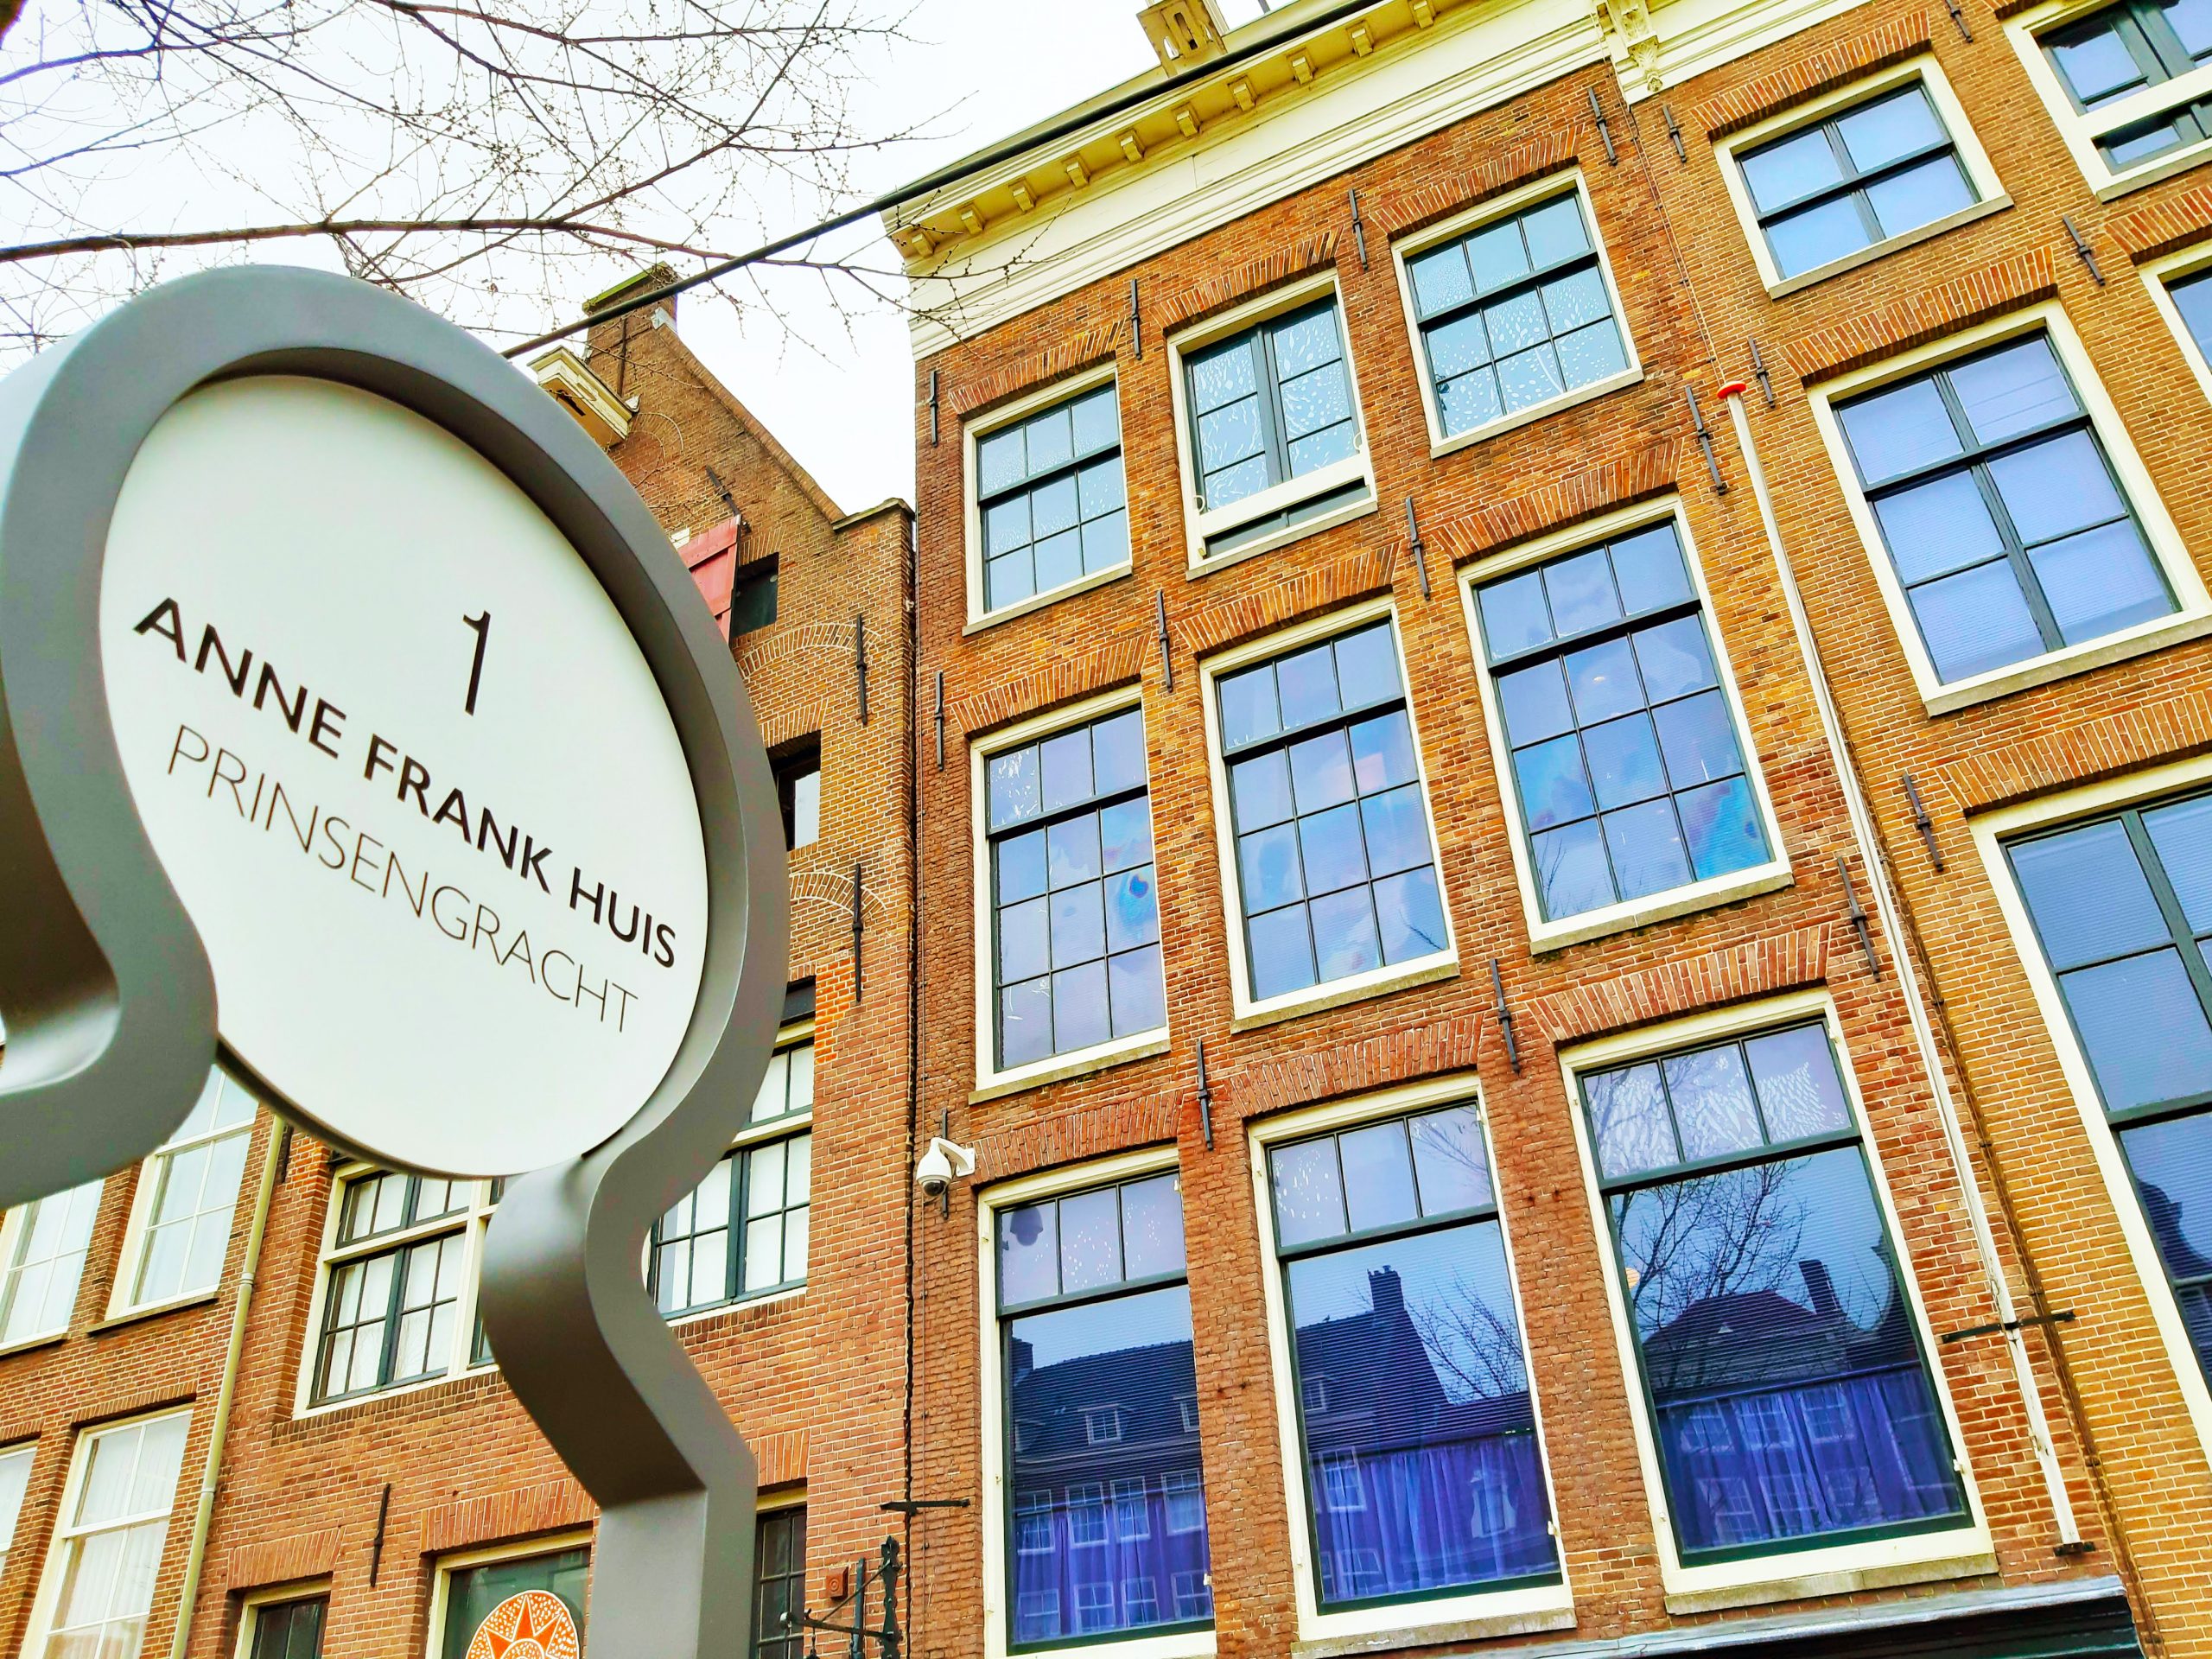 The Anne Frank House is a sobering but must-see Amsterdam attraction.